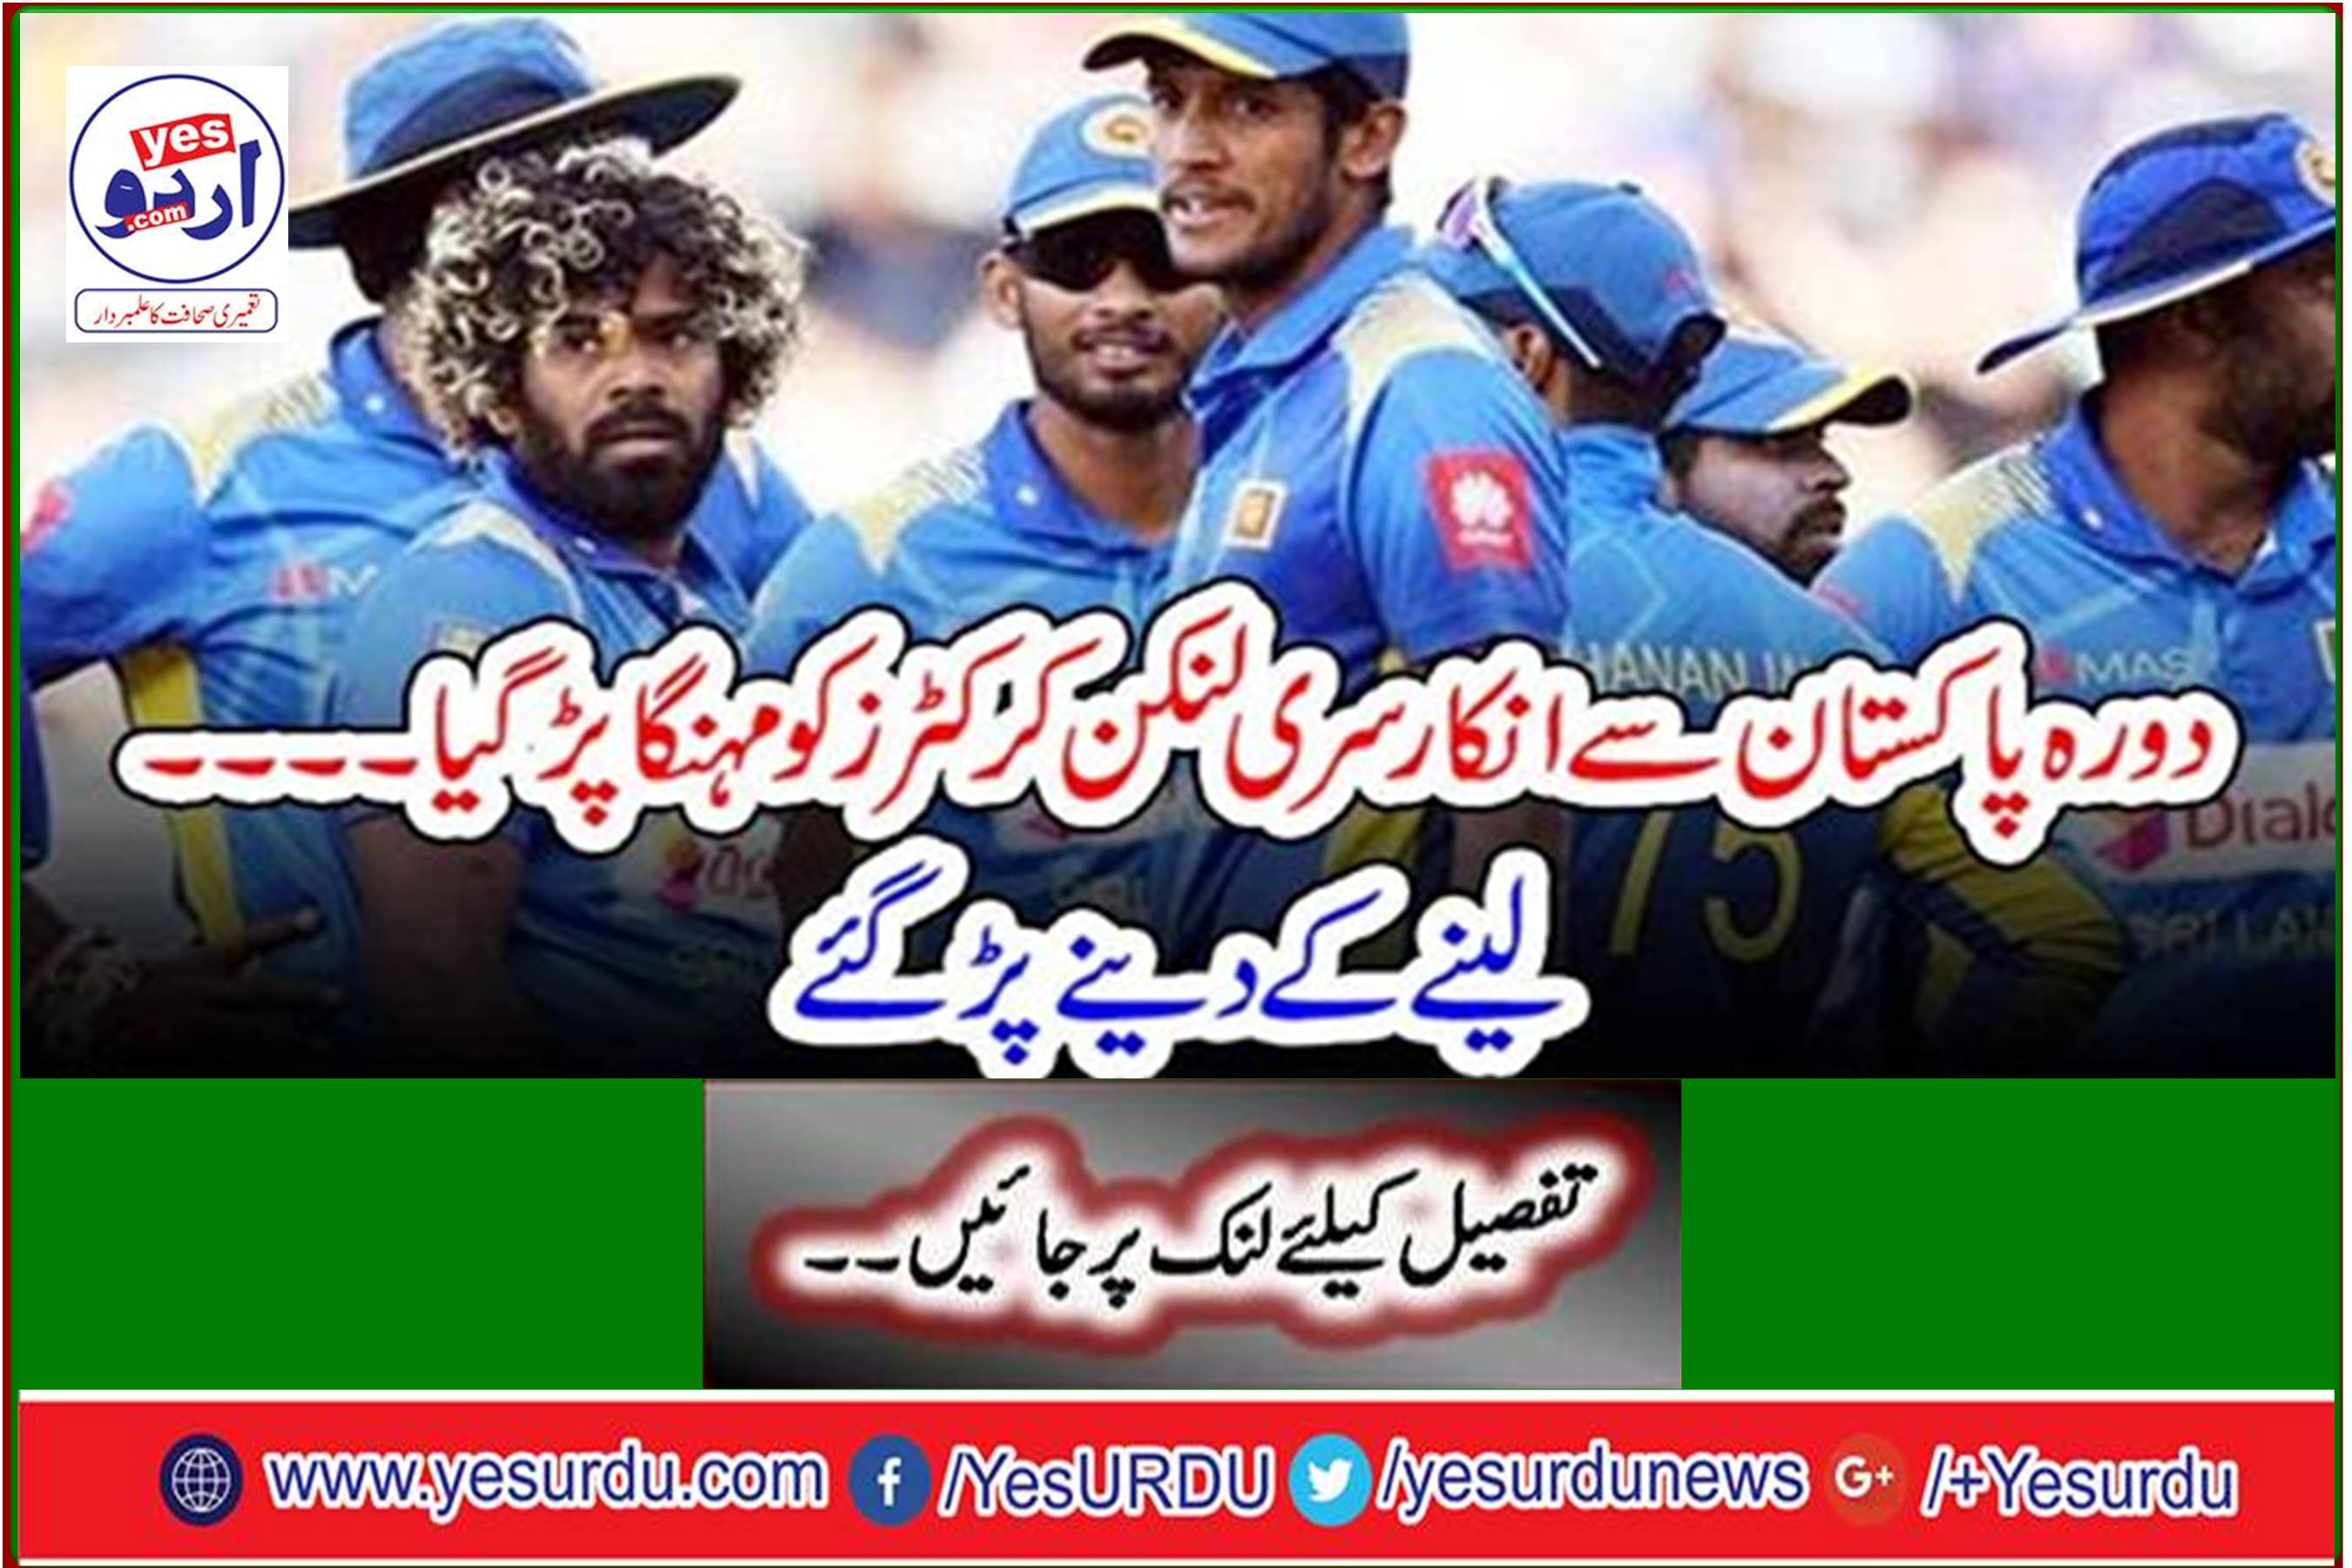 Sri Lankan cricketers face expensive refusal to visit Pakistan Had to give up